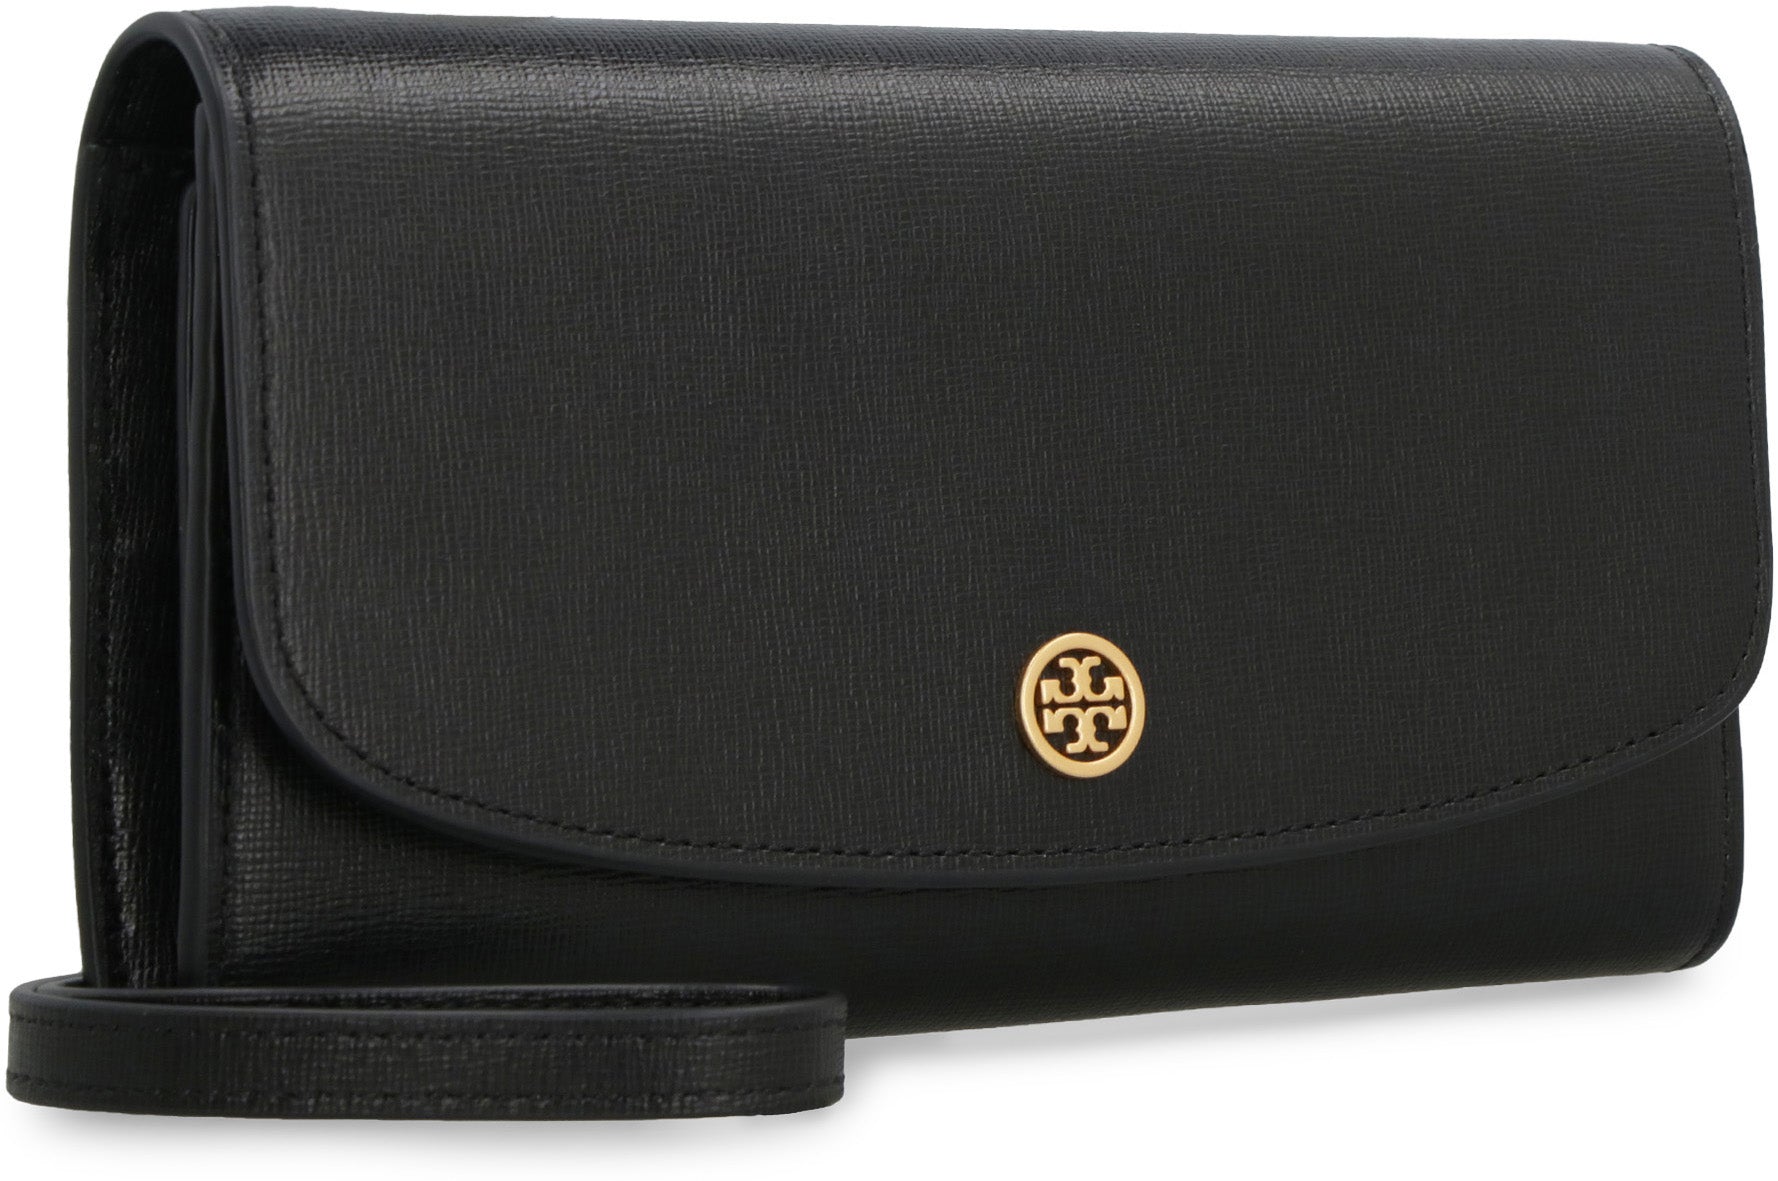 TORY BURCH: wallet in saffiano leather with metallic emblem - Black